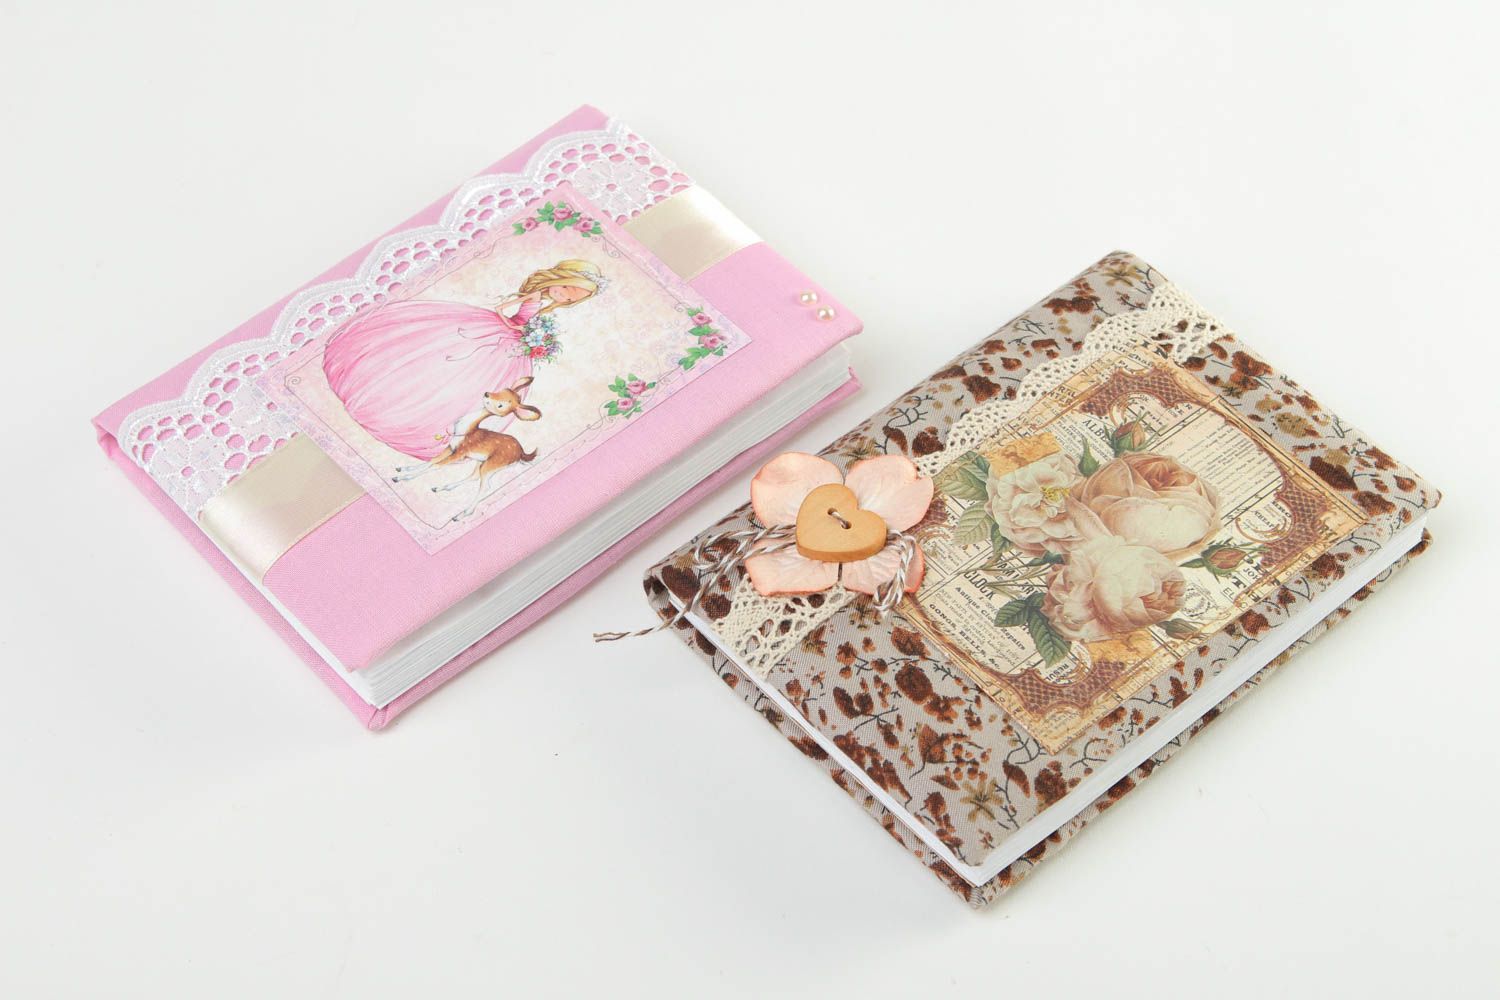 Unusual handmade notebook scrapbooking ideas notebooks and daily logs gift ideas photo 2